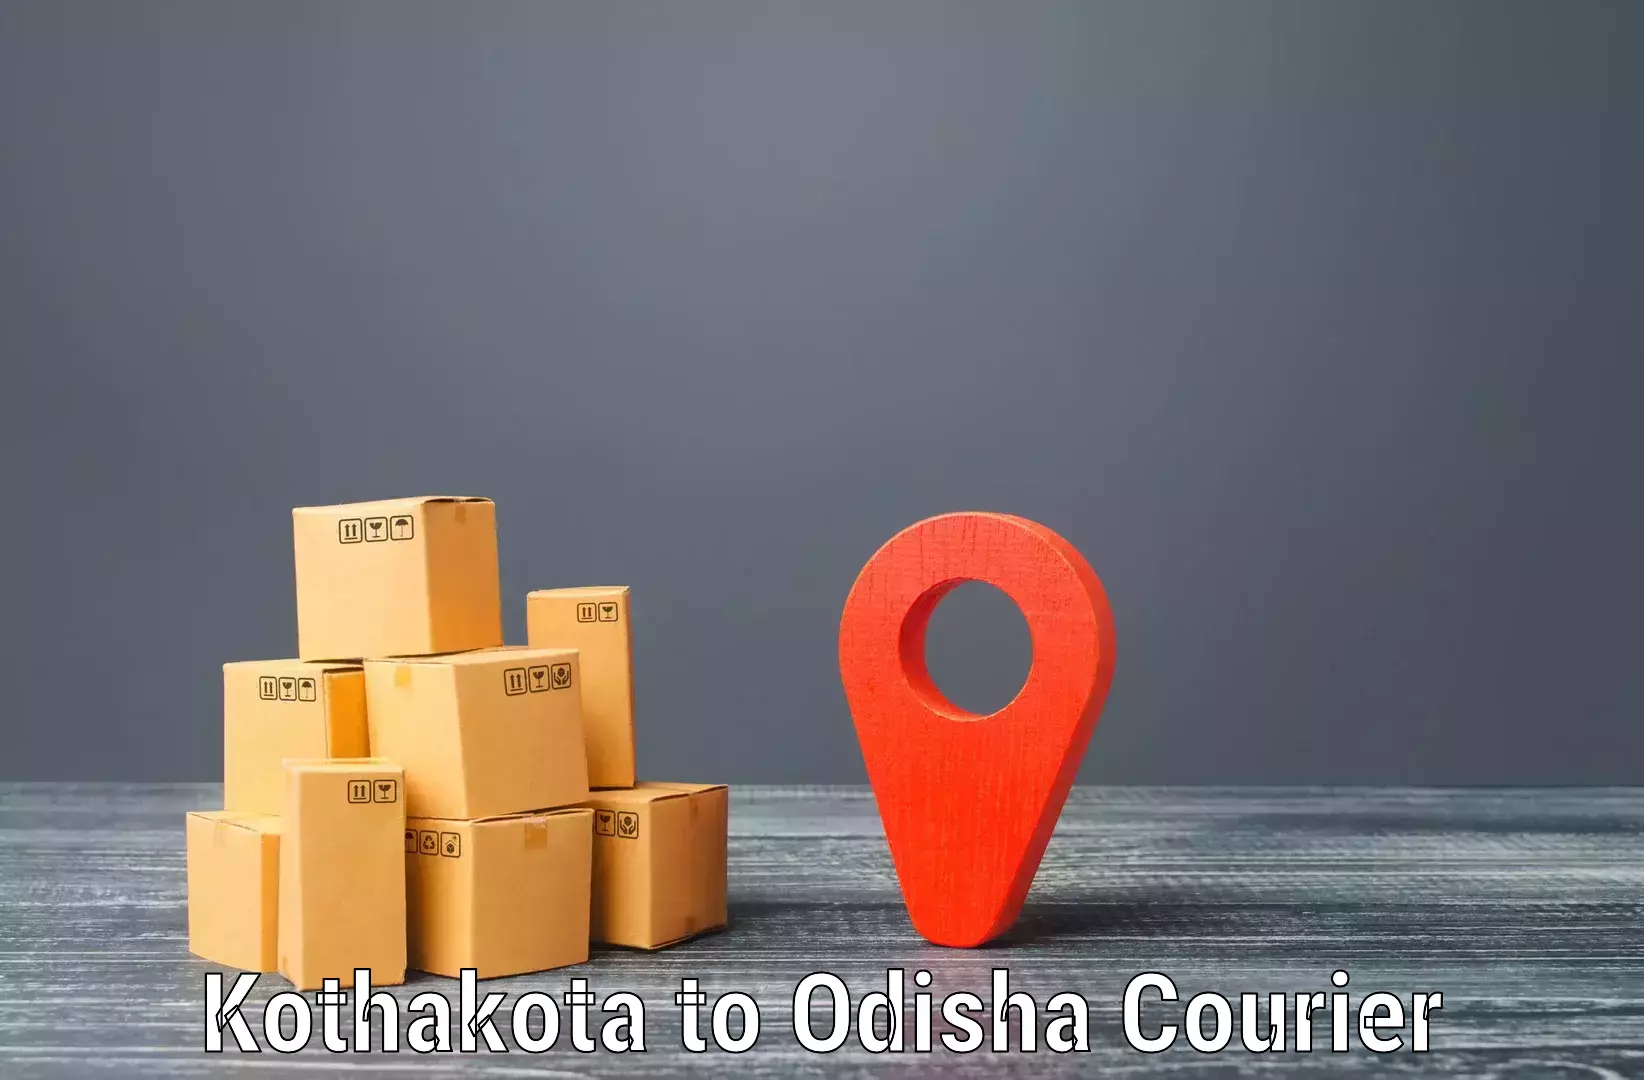 Overnight delivery in Kothakota to Kalapathar Cuttack